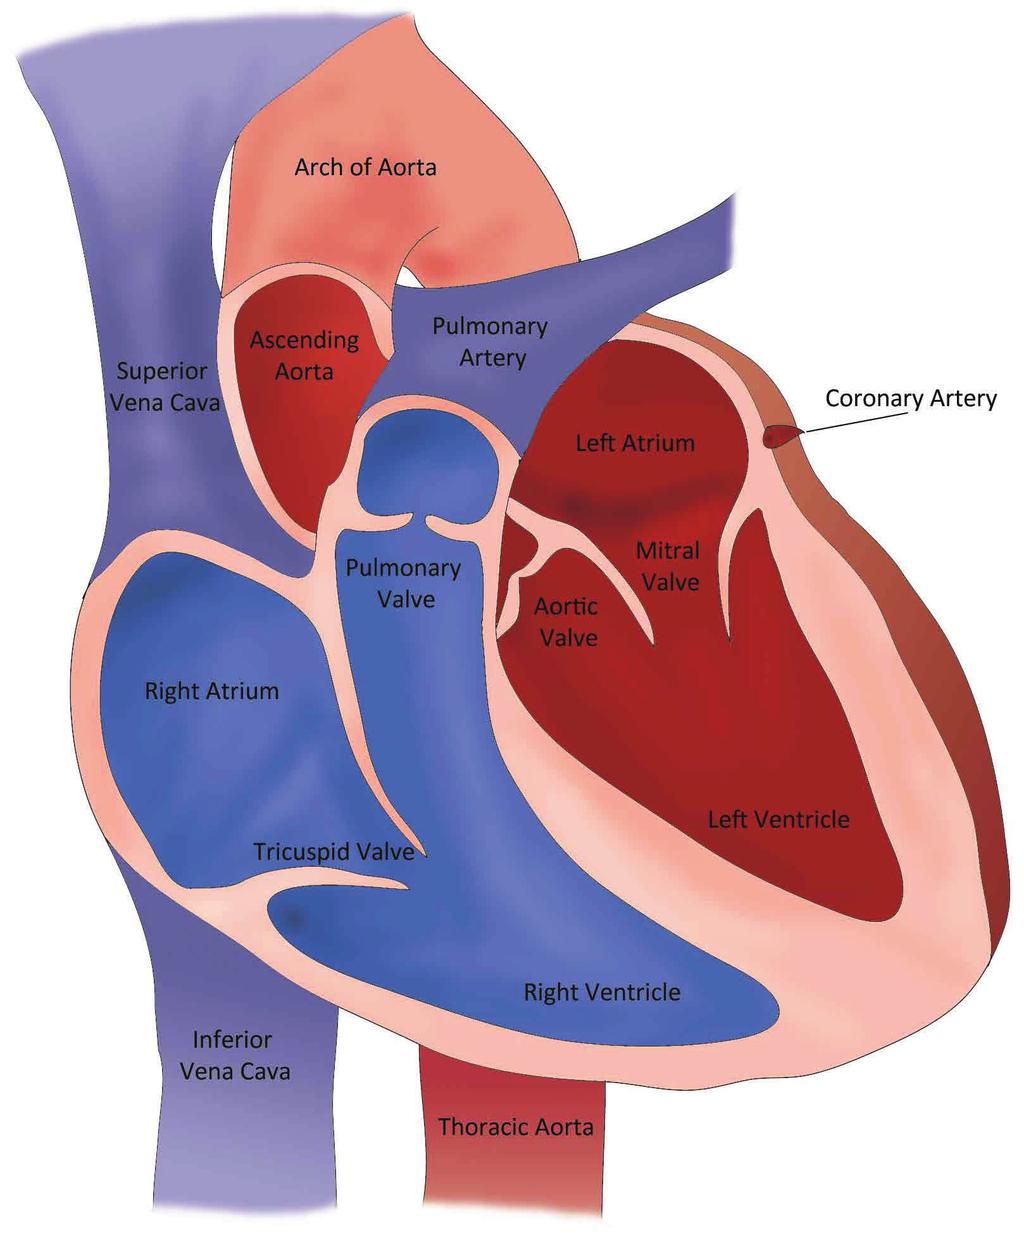 The heart also has four valves: tricuspid, mitral, pulmonary, and aortic.